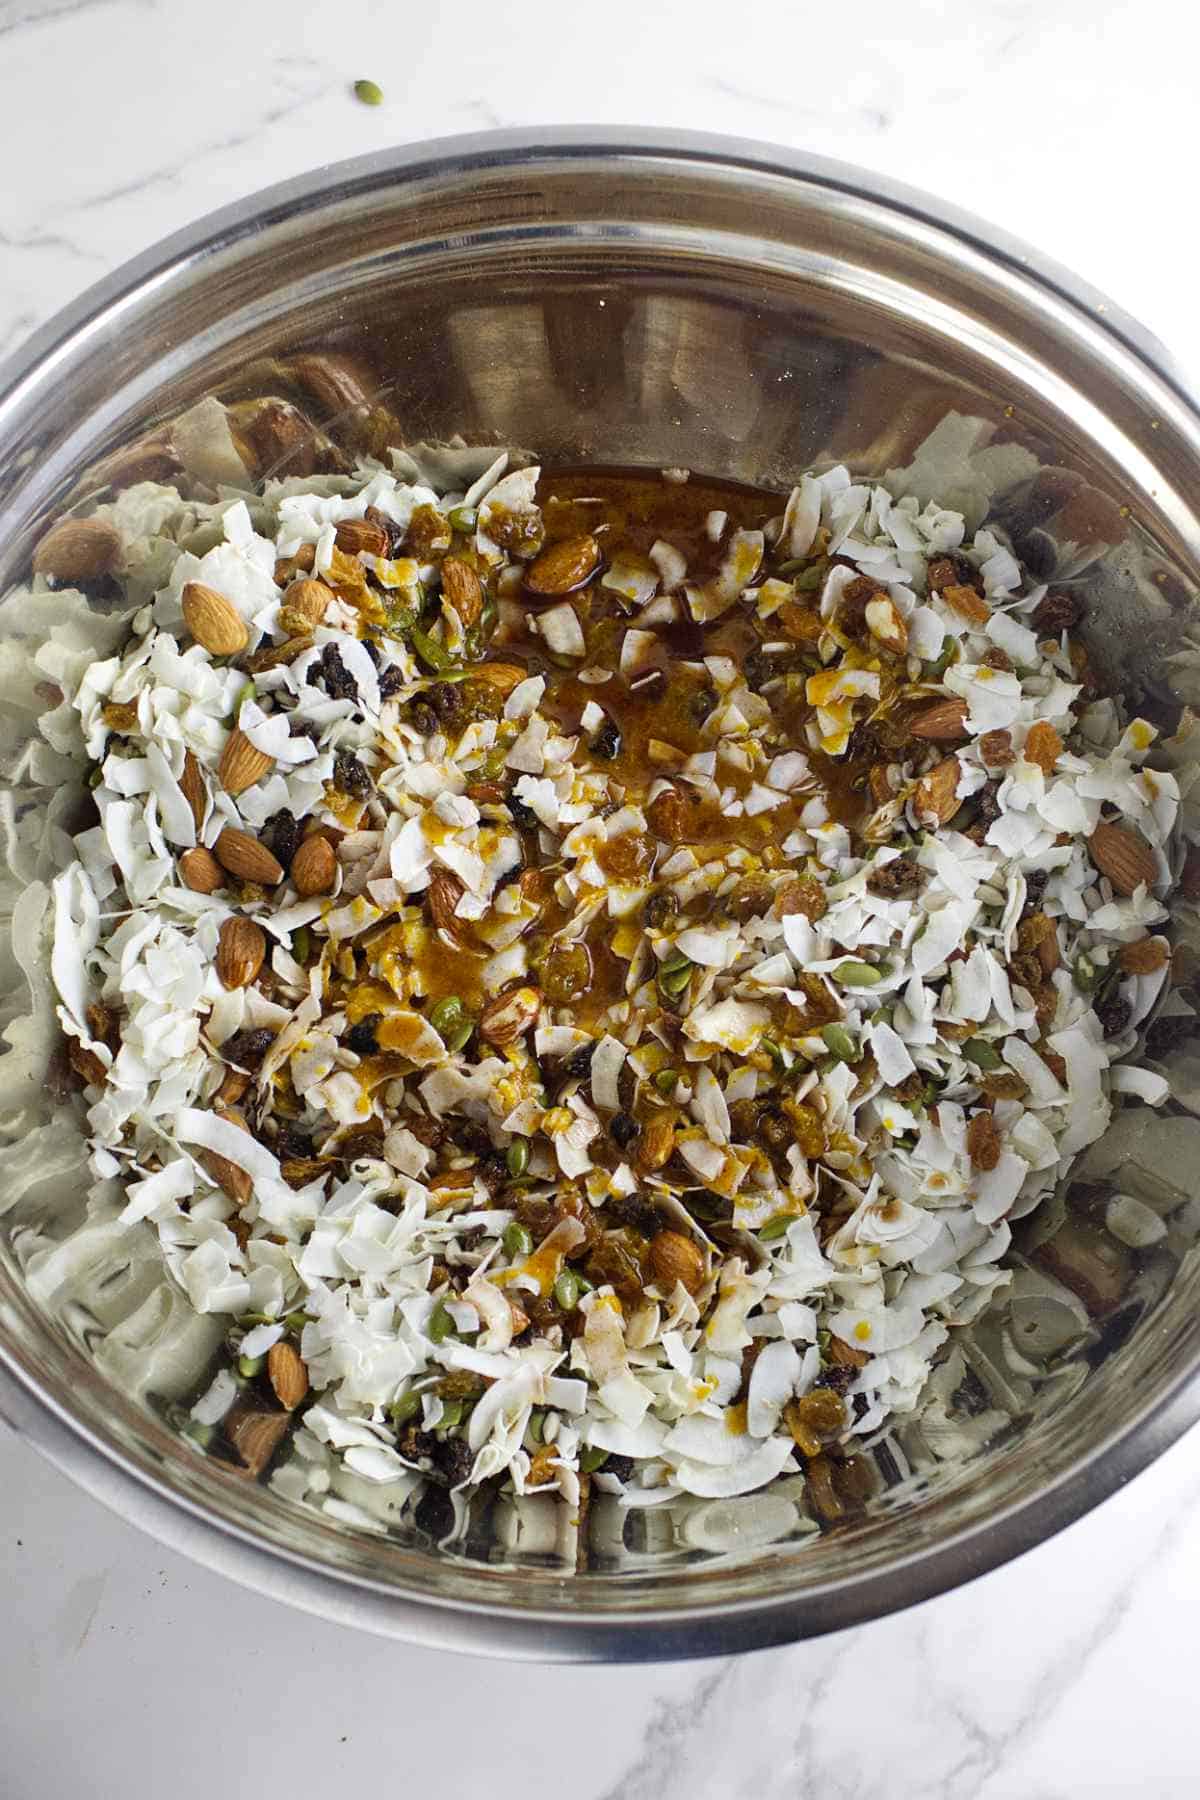 pumpkin, maple syrup, and coconut oil added to fluffy coconut and seeds.